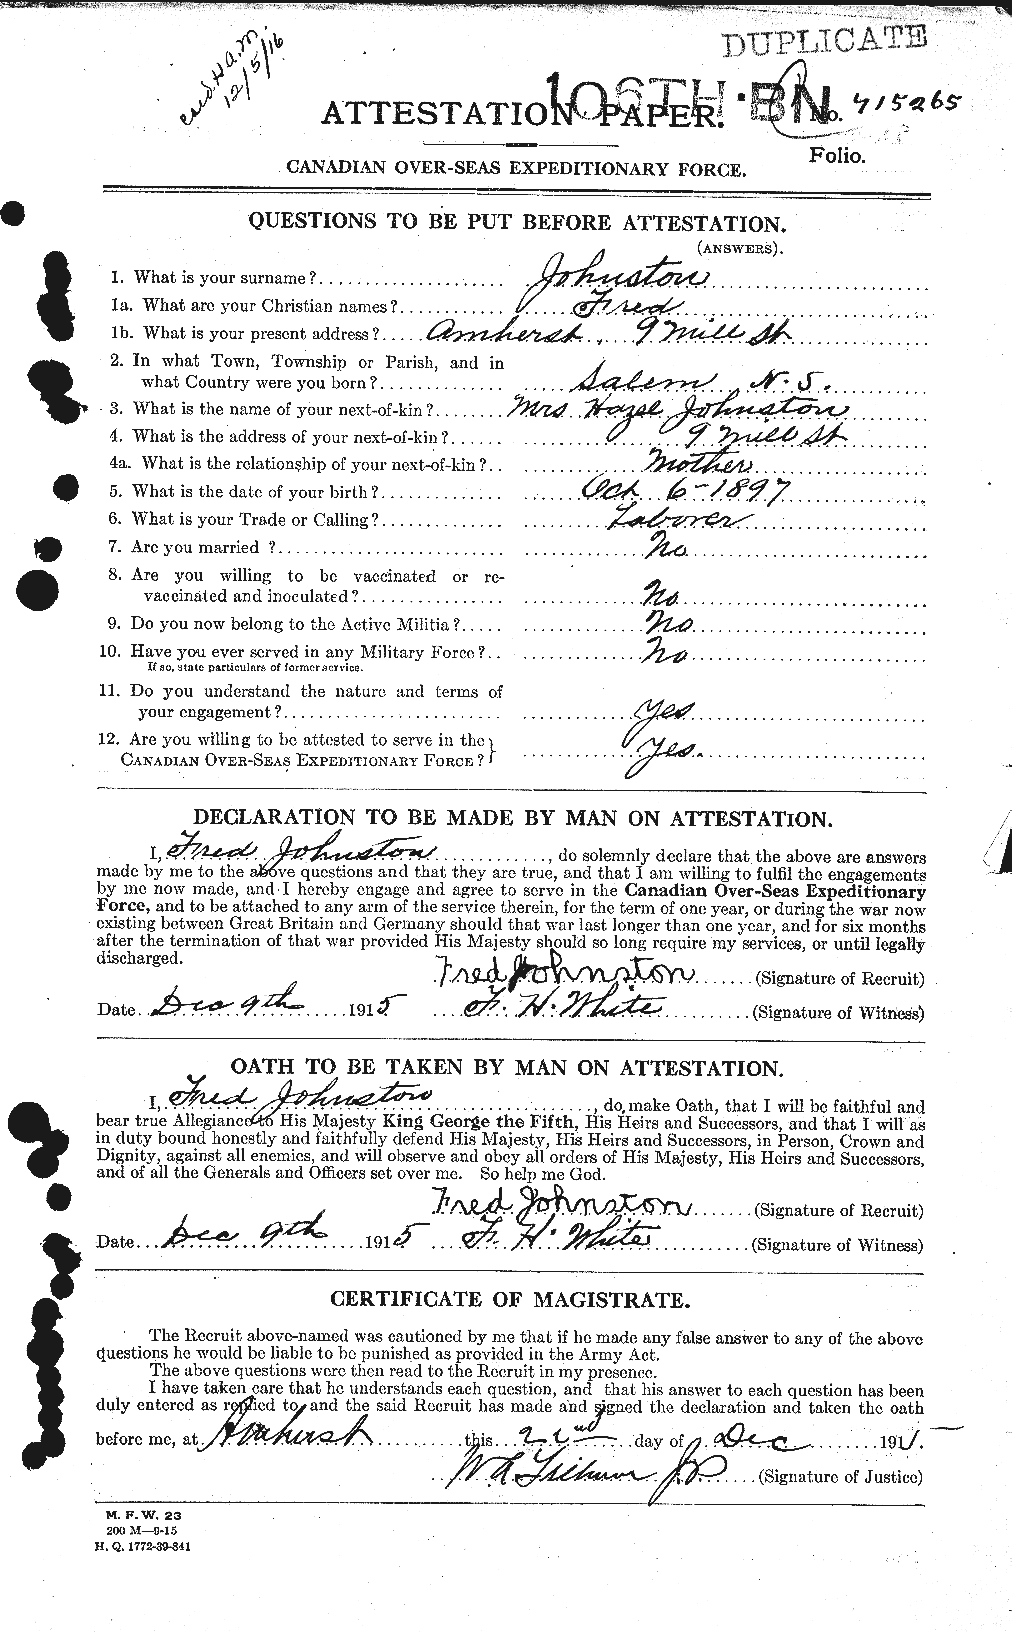 Personnel Records of the First World War - CEF 423283a